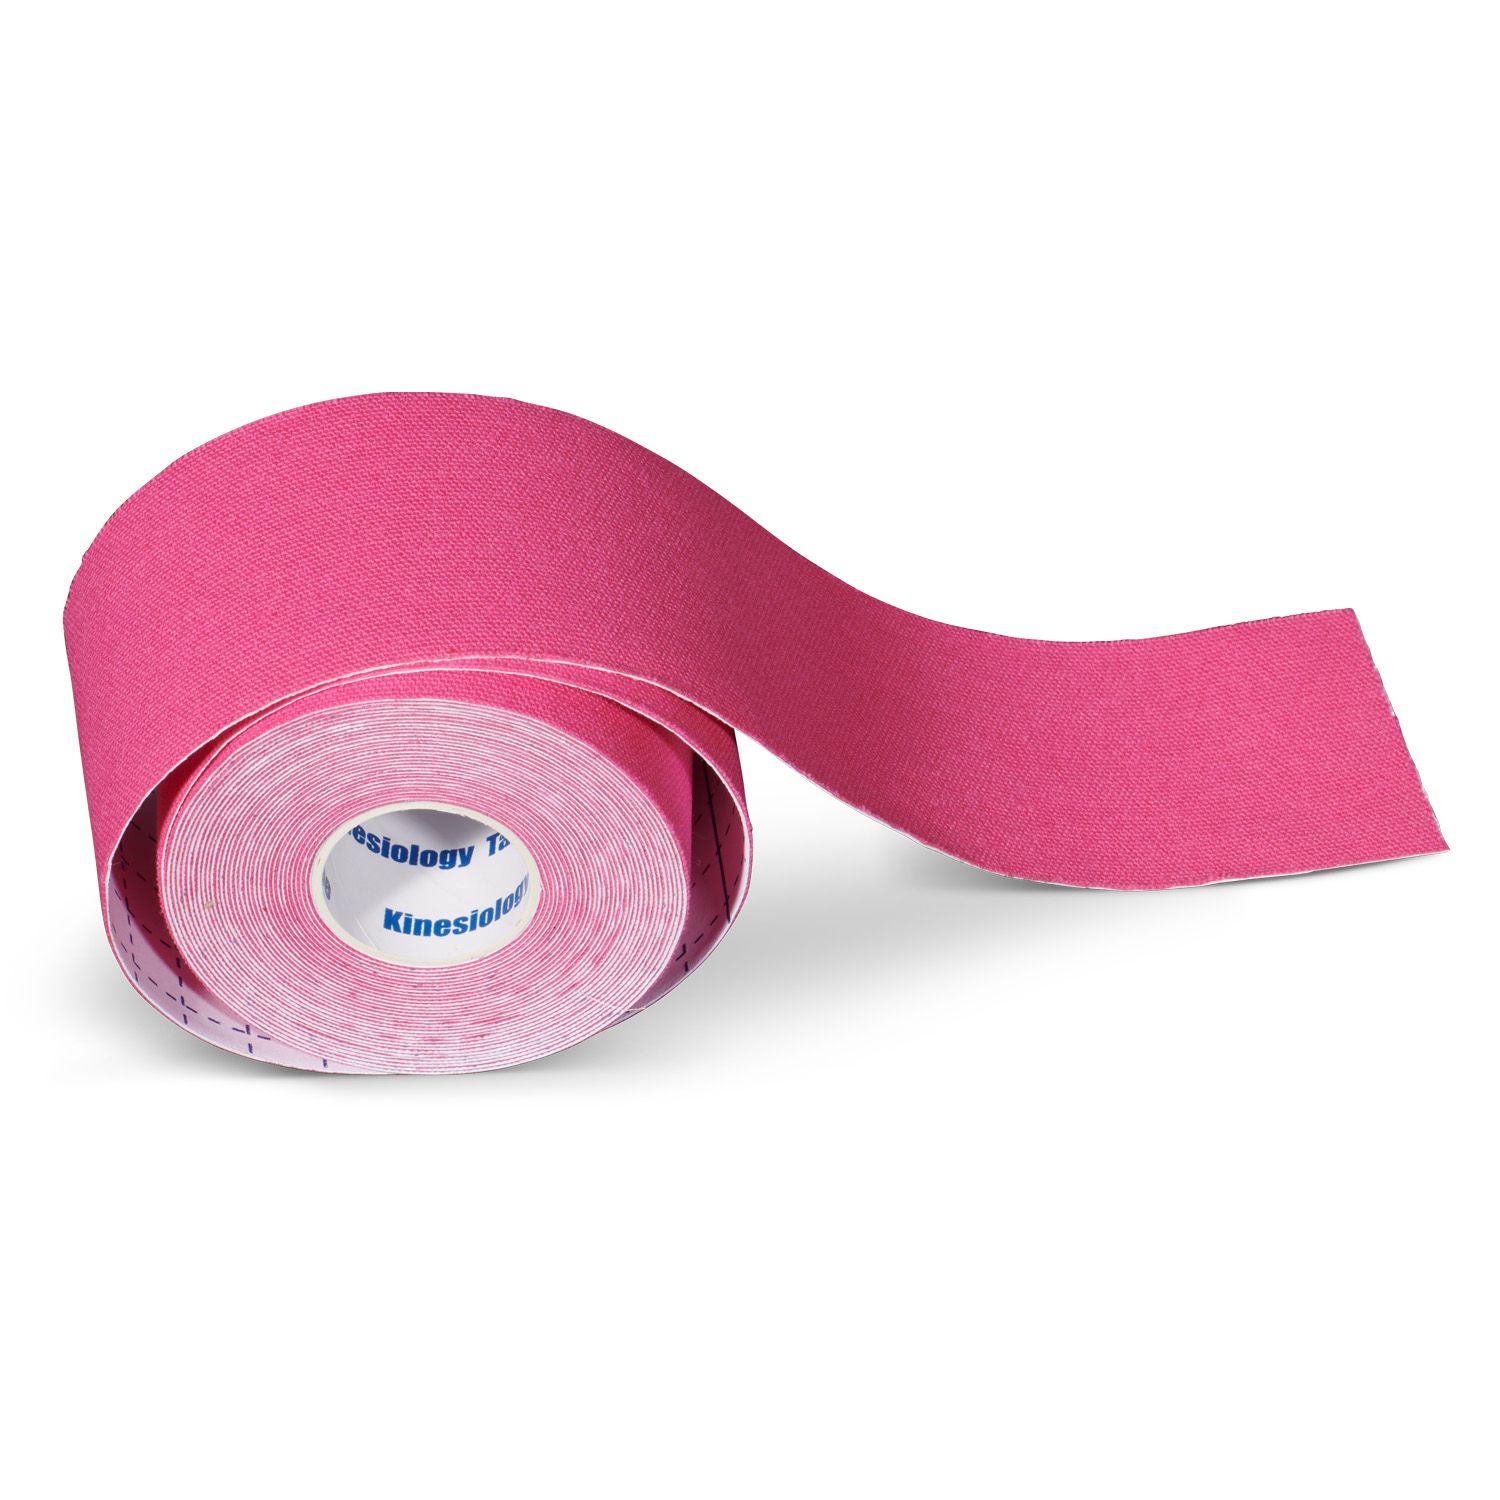 Kinesiology tape 6 rolls plus 2 rolls for free pink